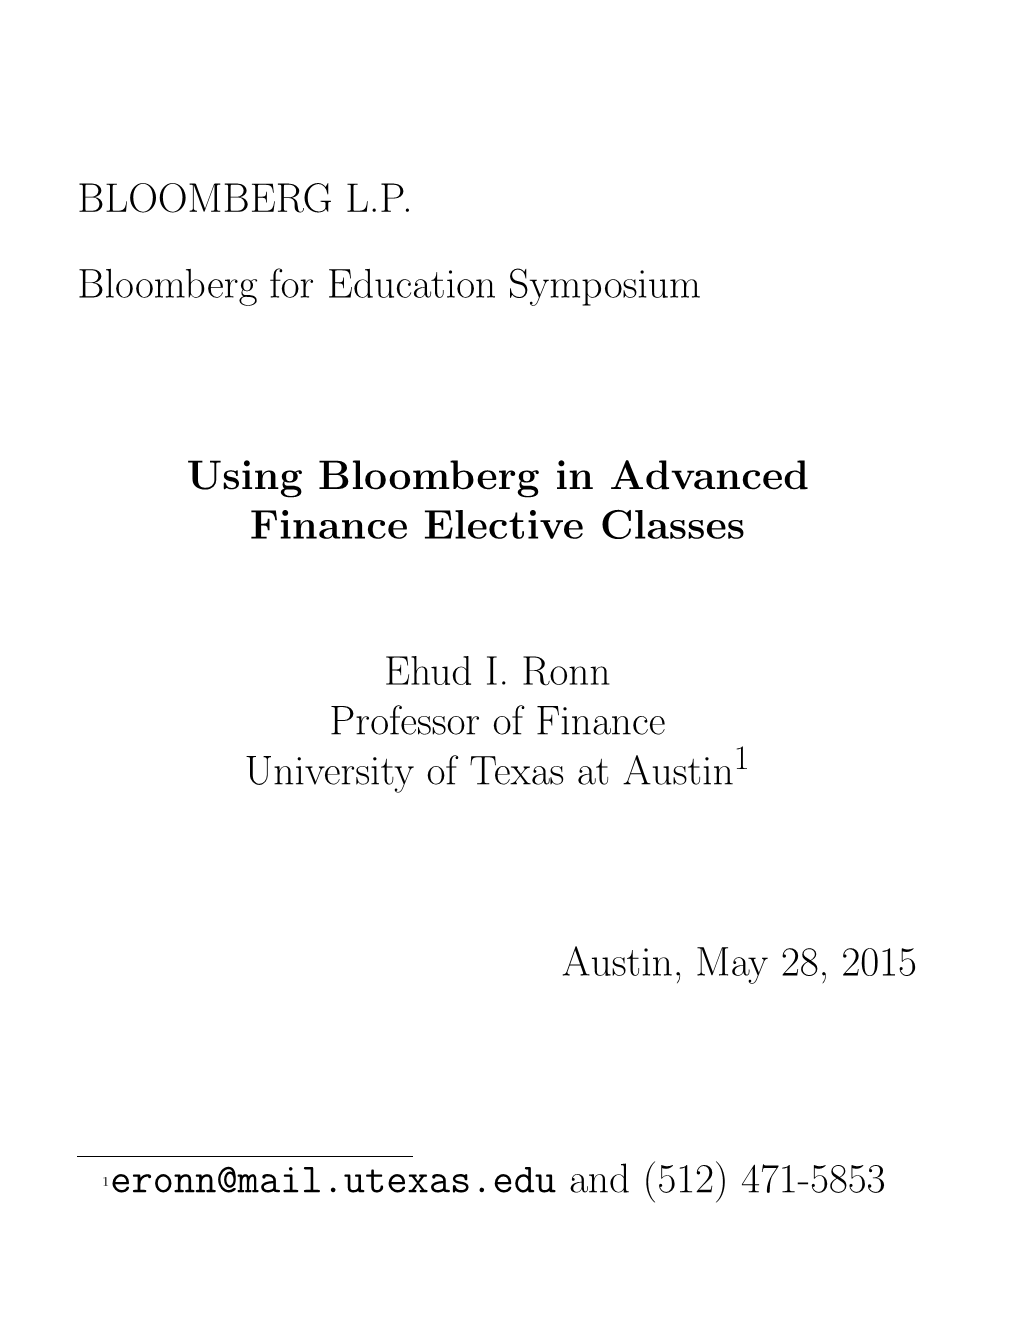 BLOOMBERG L.P. Bloomberg for Education Symposium Using Bloomberg in Advanced Finance Elective Classes Ehud I. Ronn Professor Of